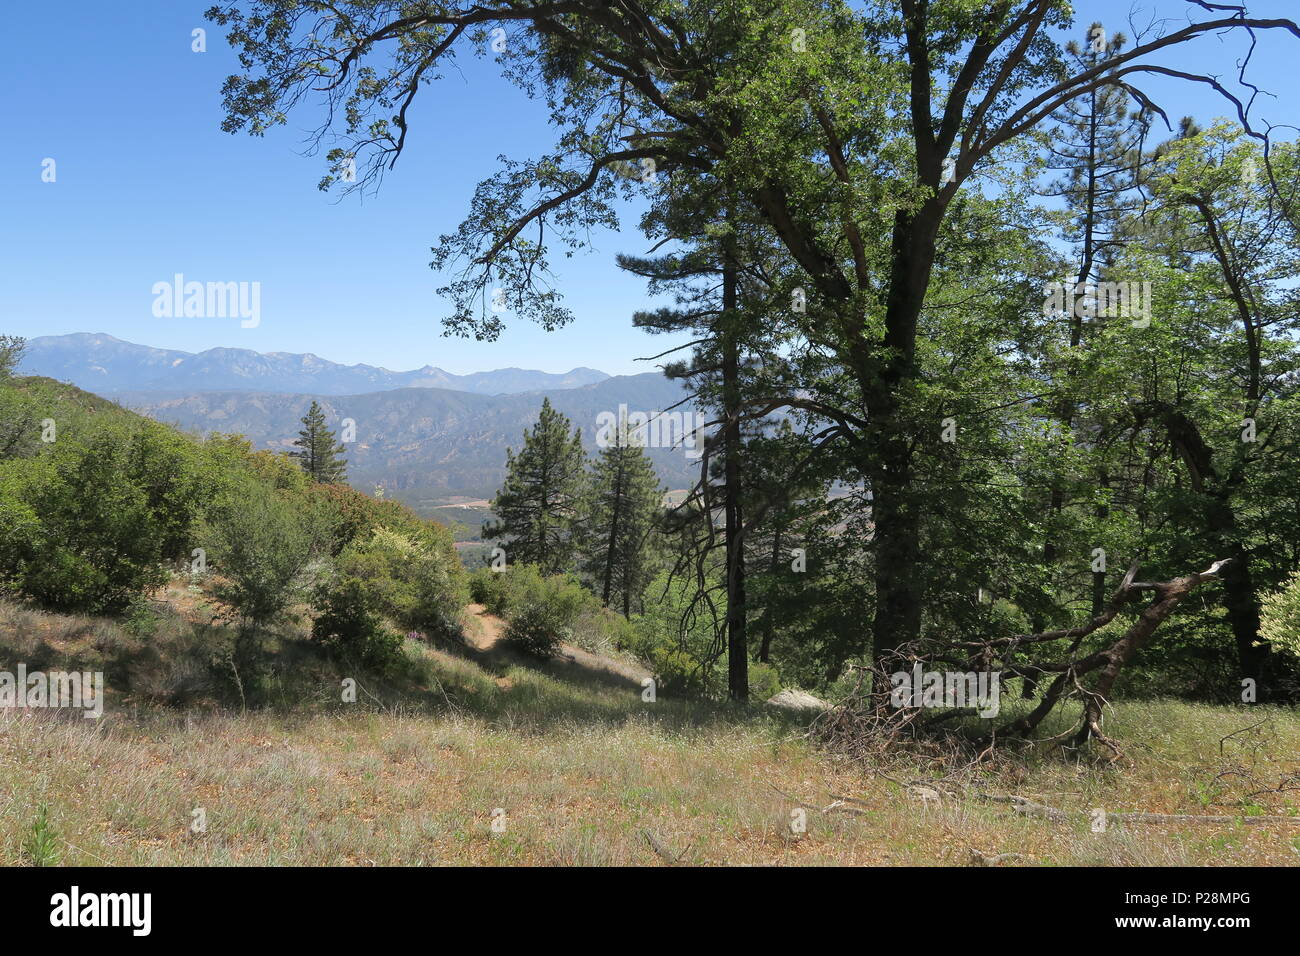 Hiking wooded areas with meadows, trees, and lupines in Rabbit Park in Azusa, California and Cahuilla Mountain Trail in the San Bernardino Mountains. Stock Photo